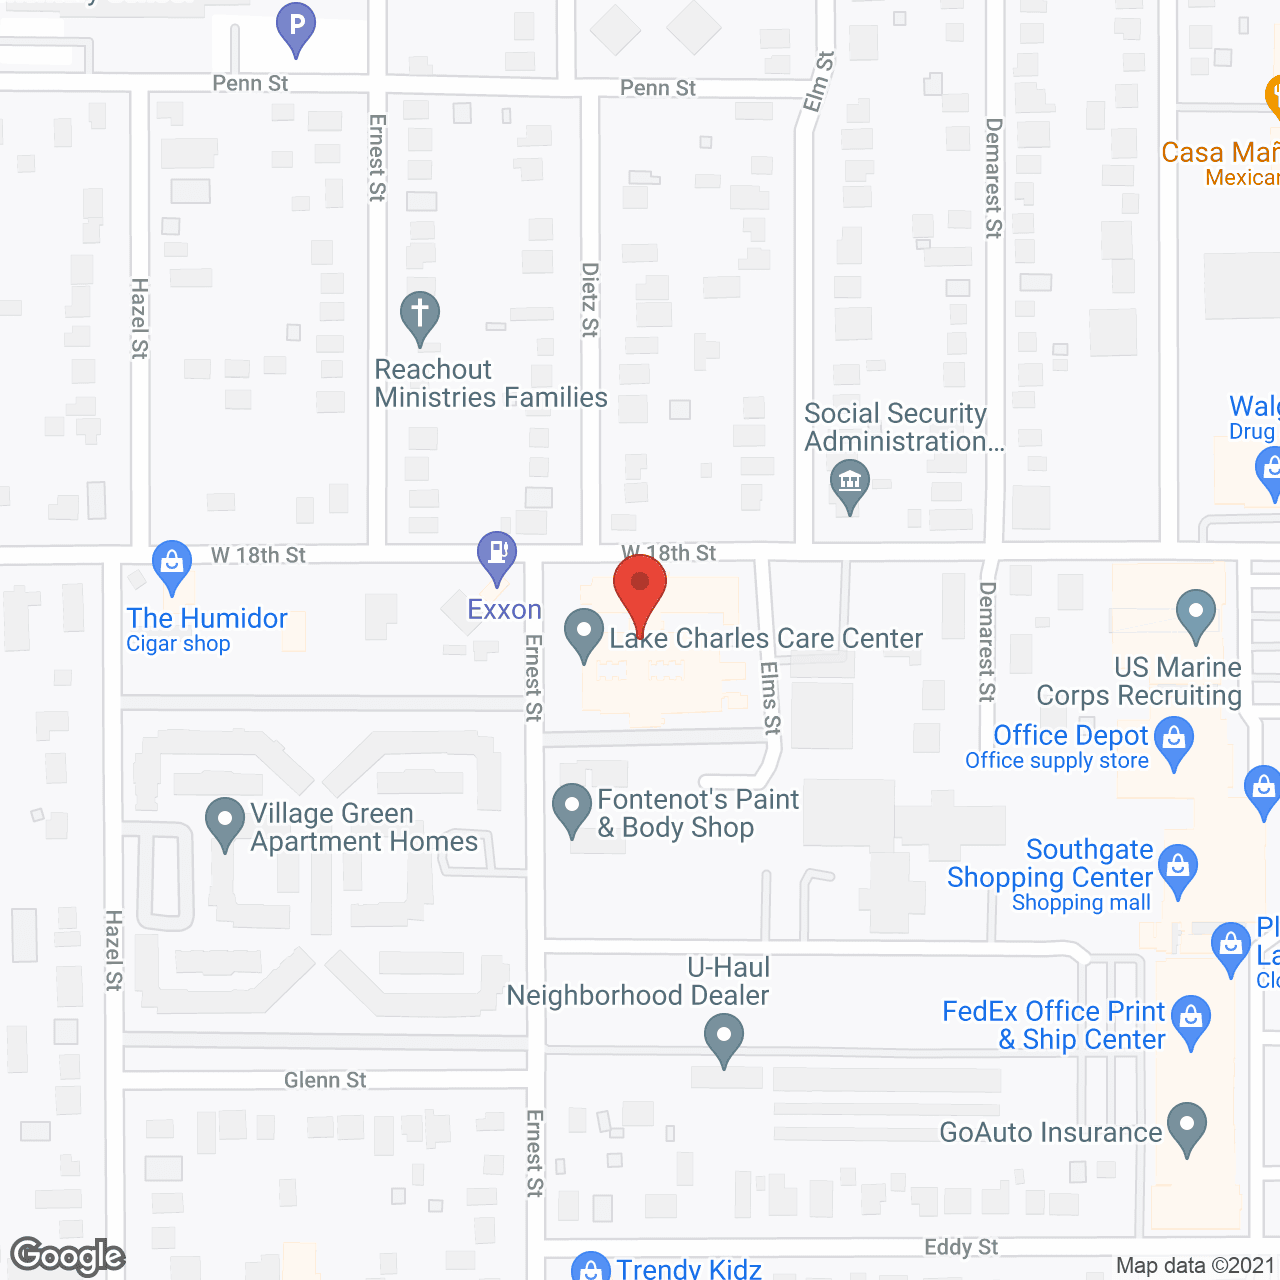 Lake Charles Care Ctr in google map